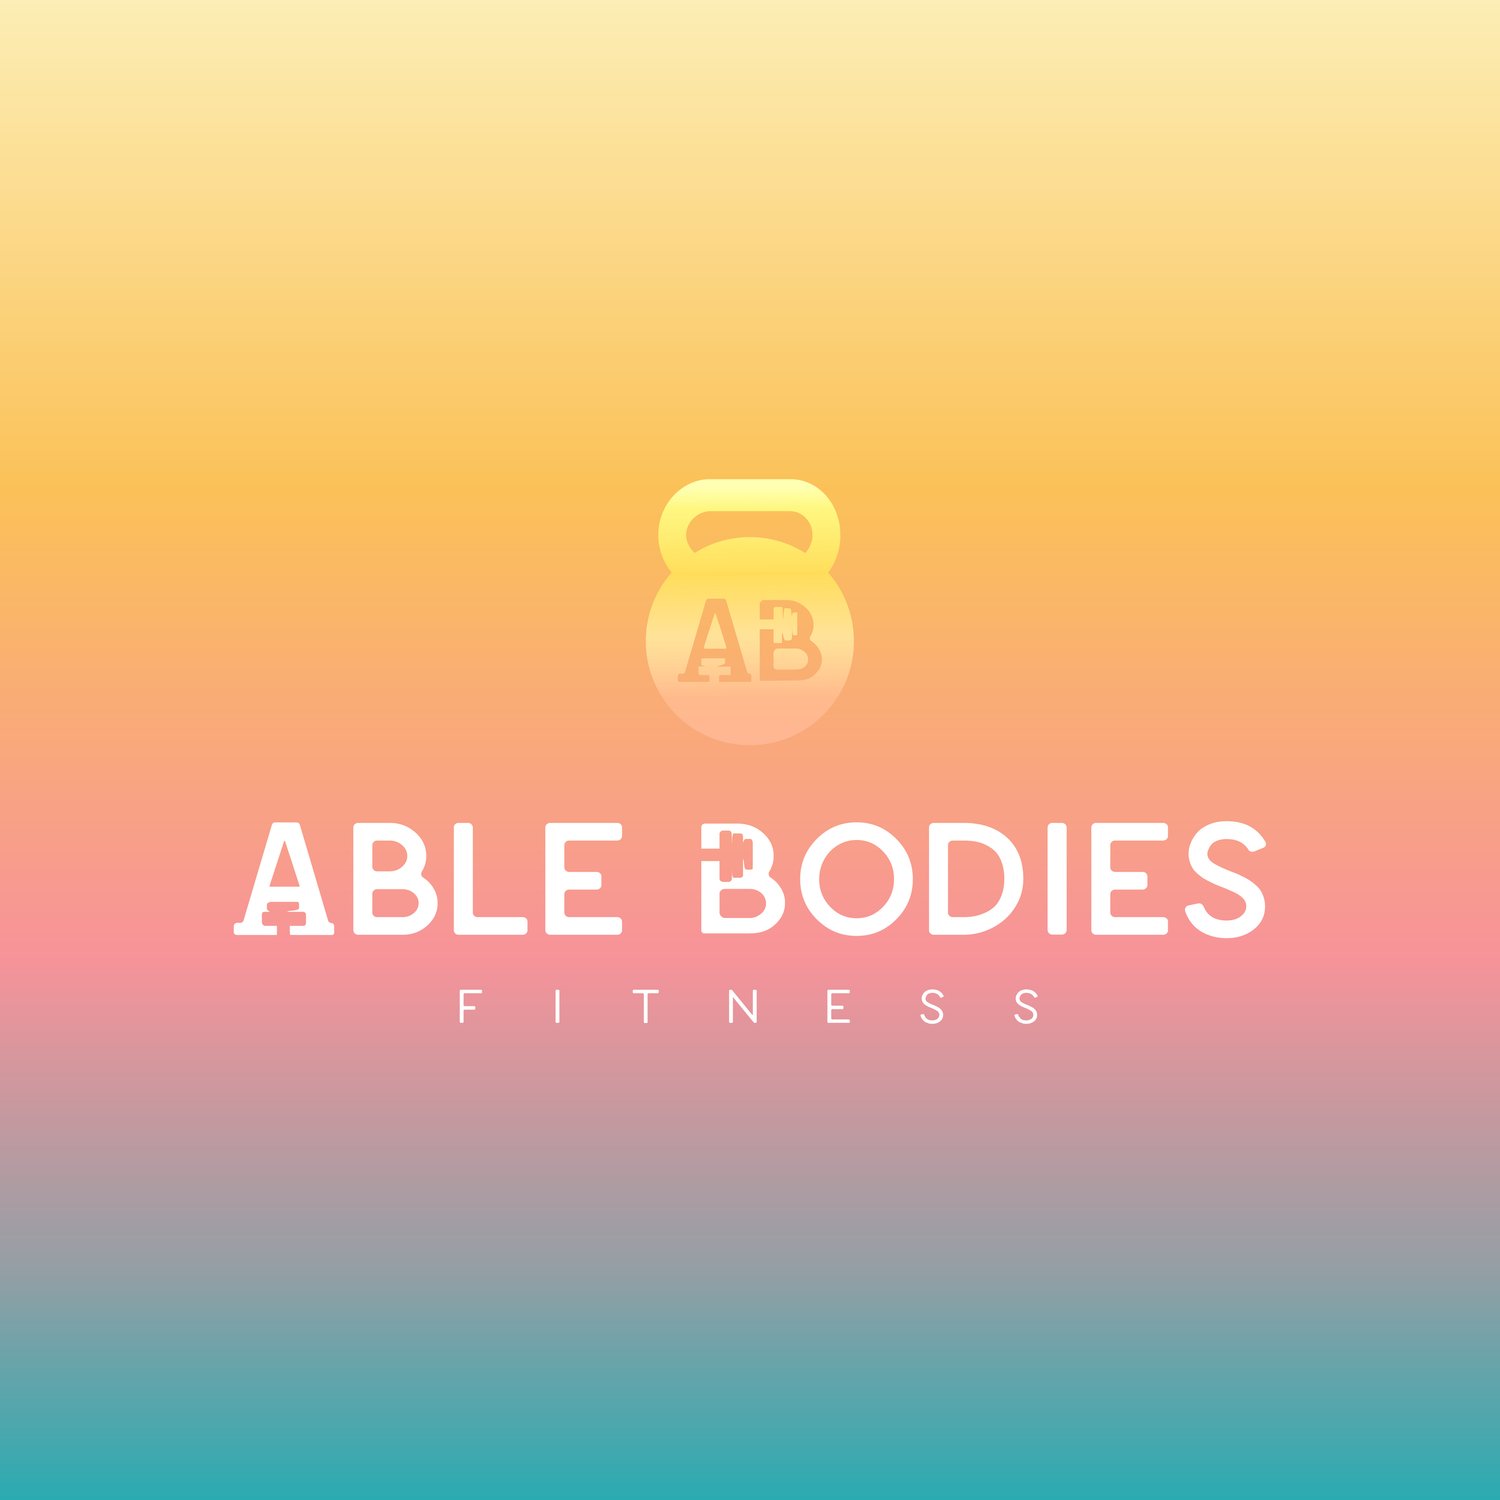 Able Bodies Fitness